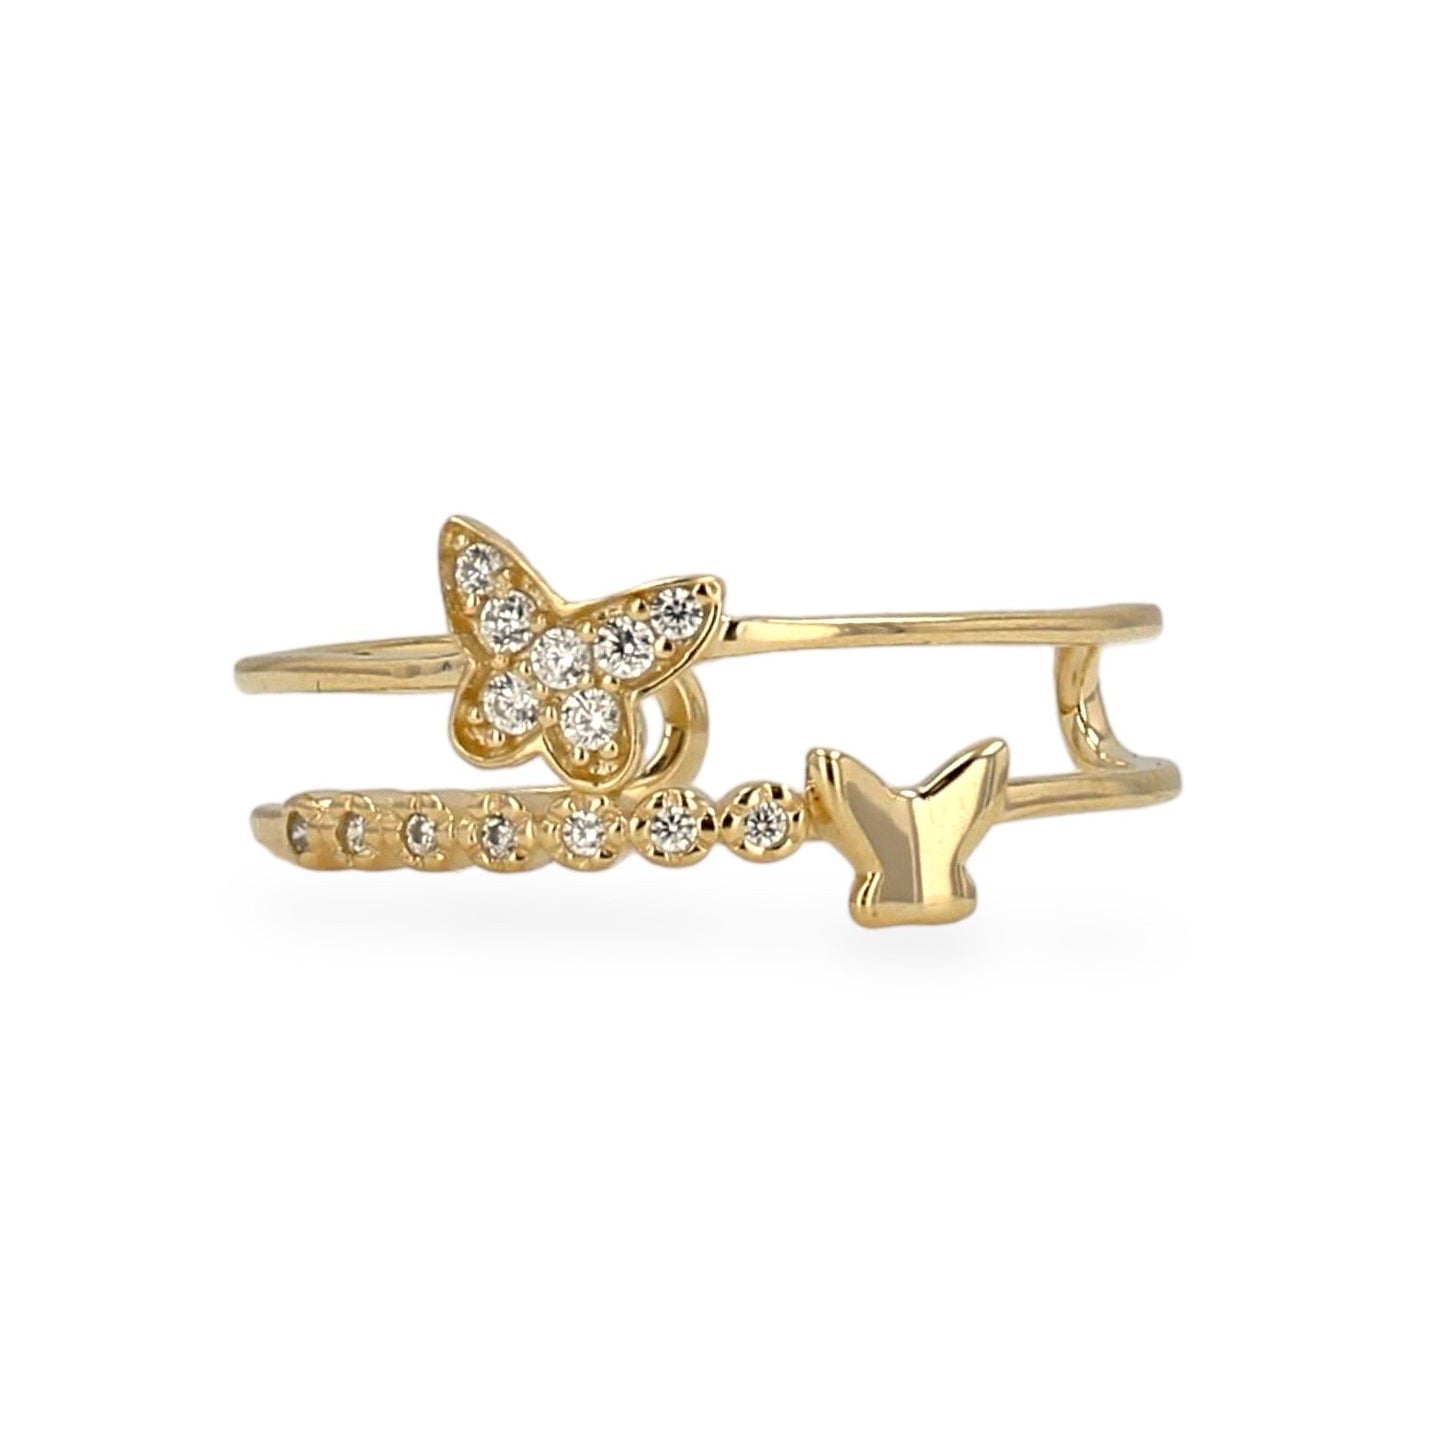 14K Yellow gold butterfly ring-226052